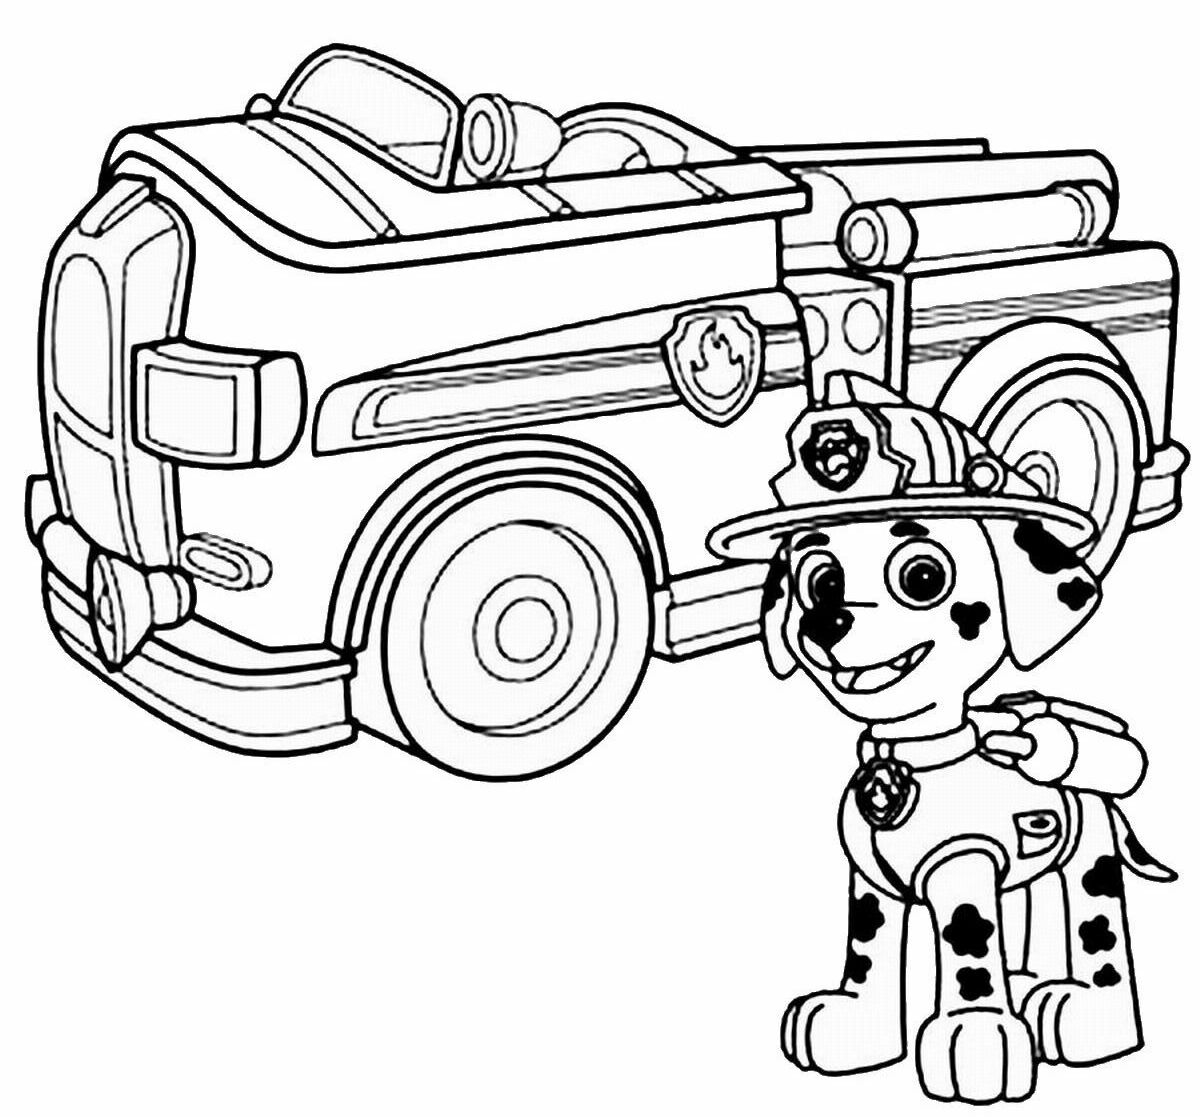 328 Cute Free Printable Paw Patrol Coloring Page for Adult